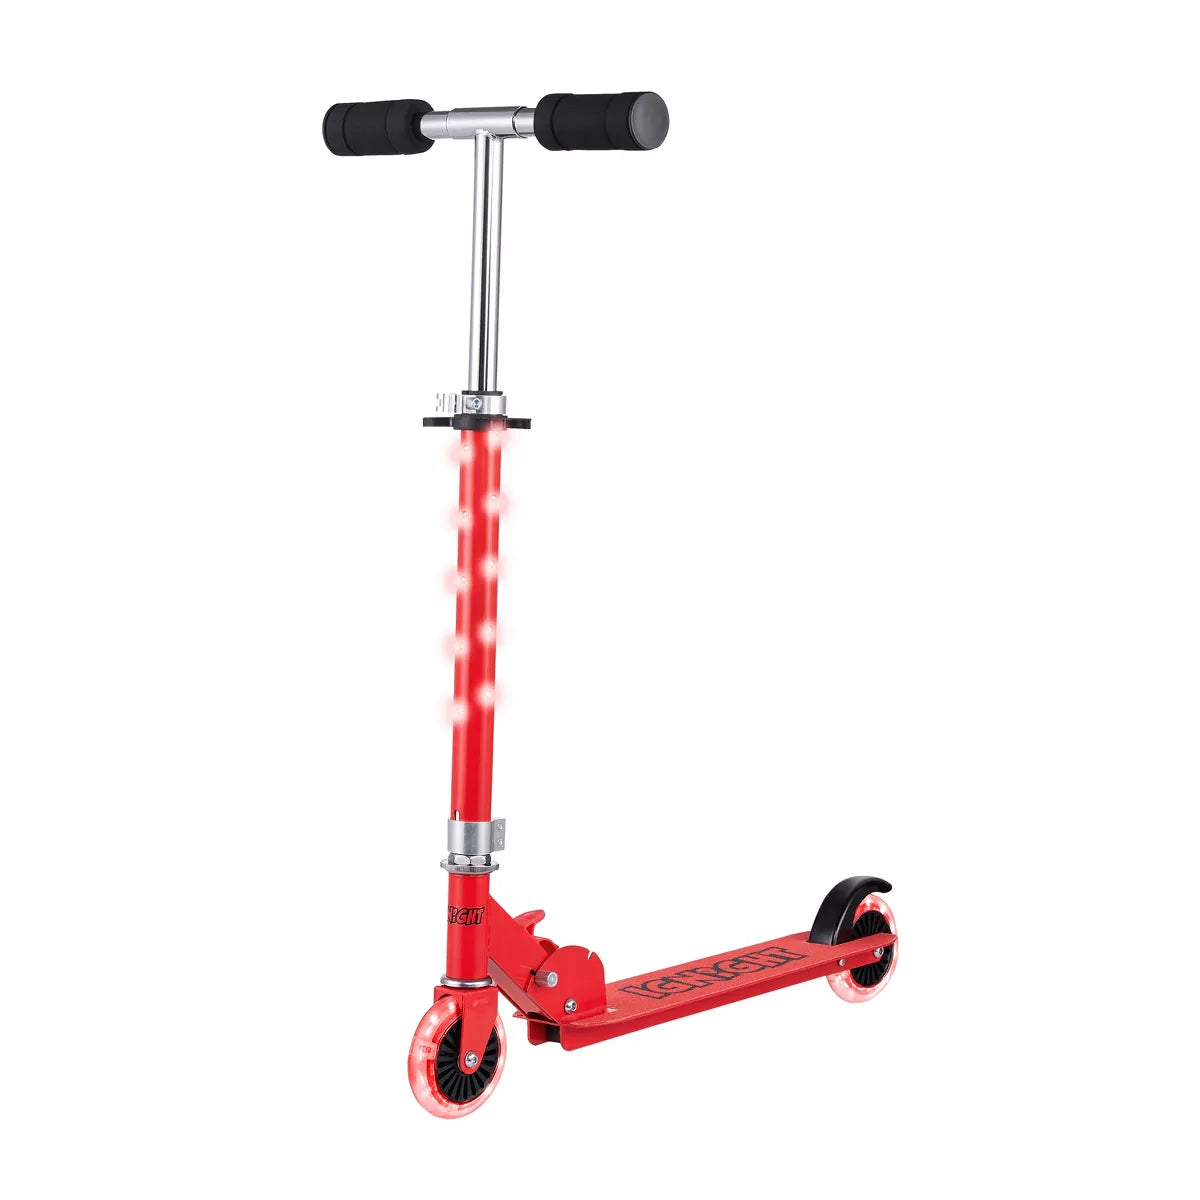 2-wheeled-scooter-ast602ign-red-1